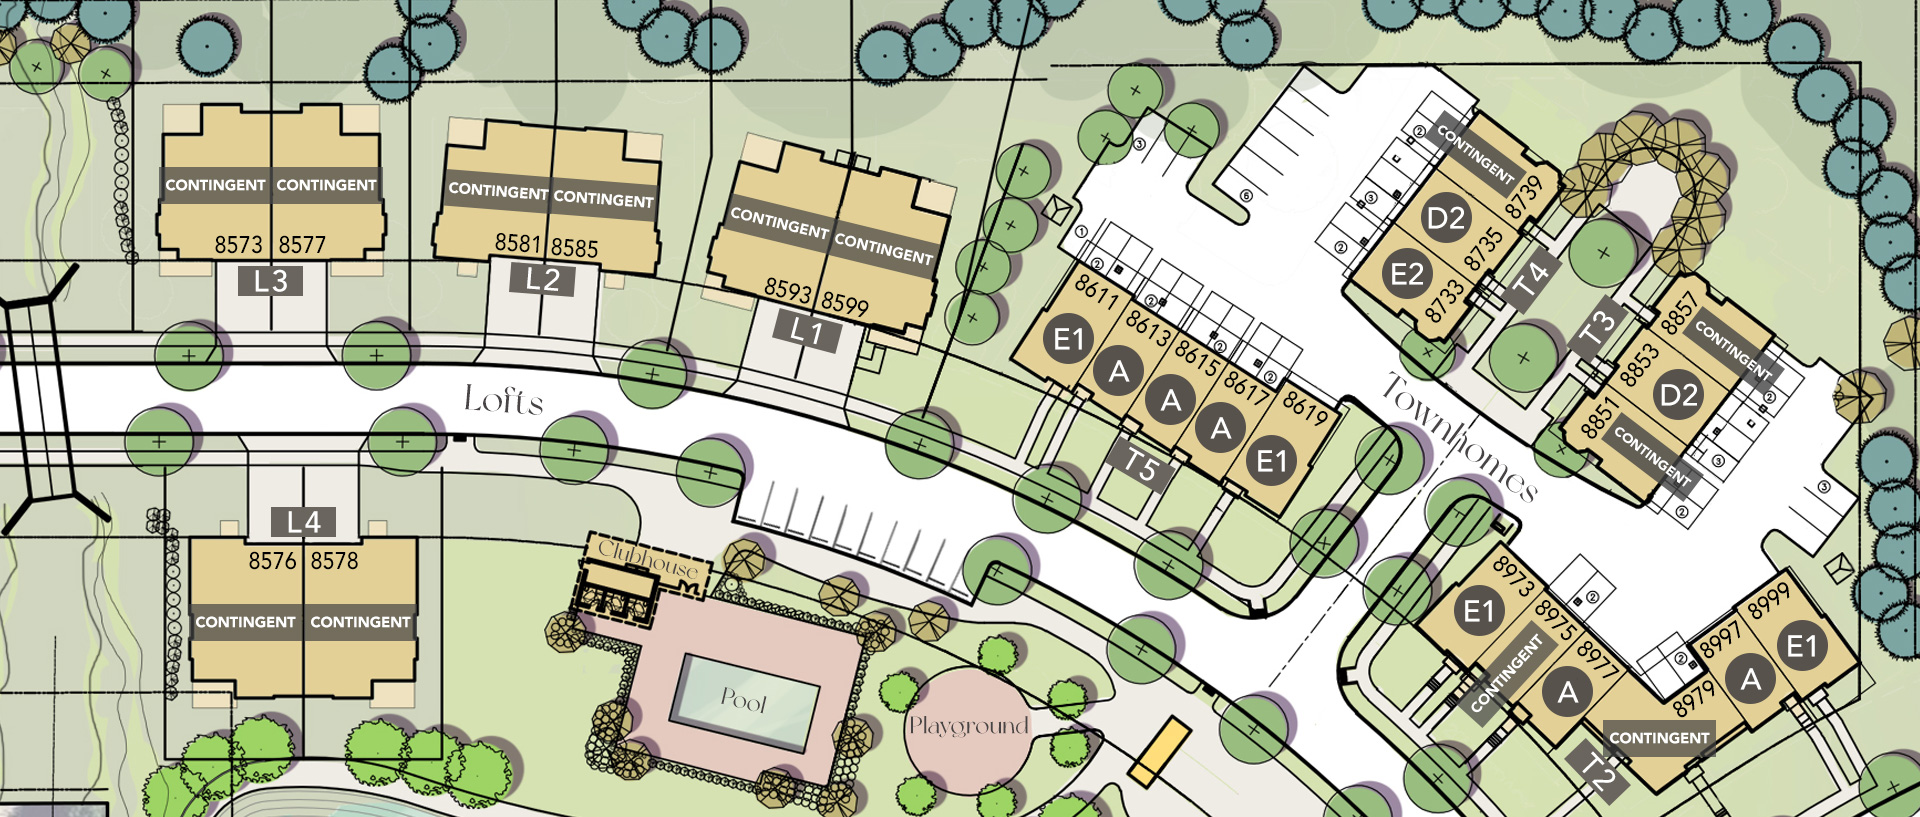 Site map of Luxury at Canvas with individual unit status showing if contingent, and unit style label showing if available